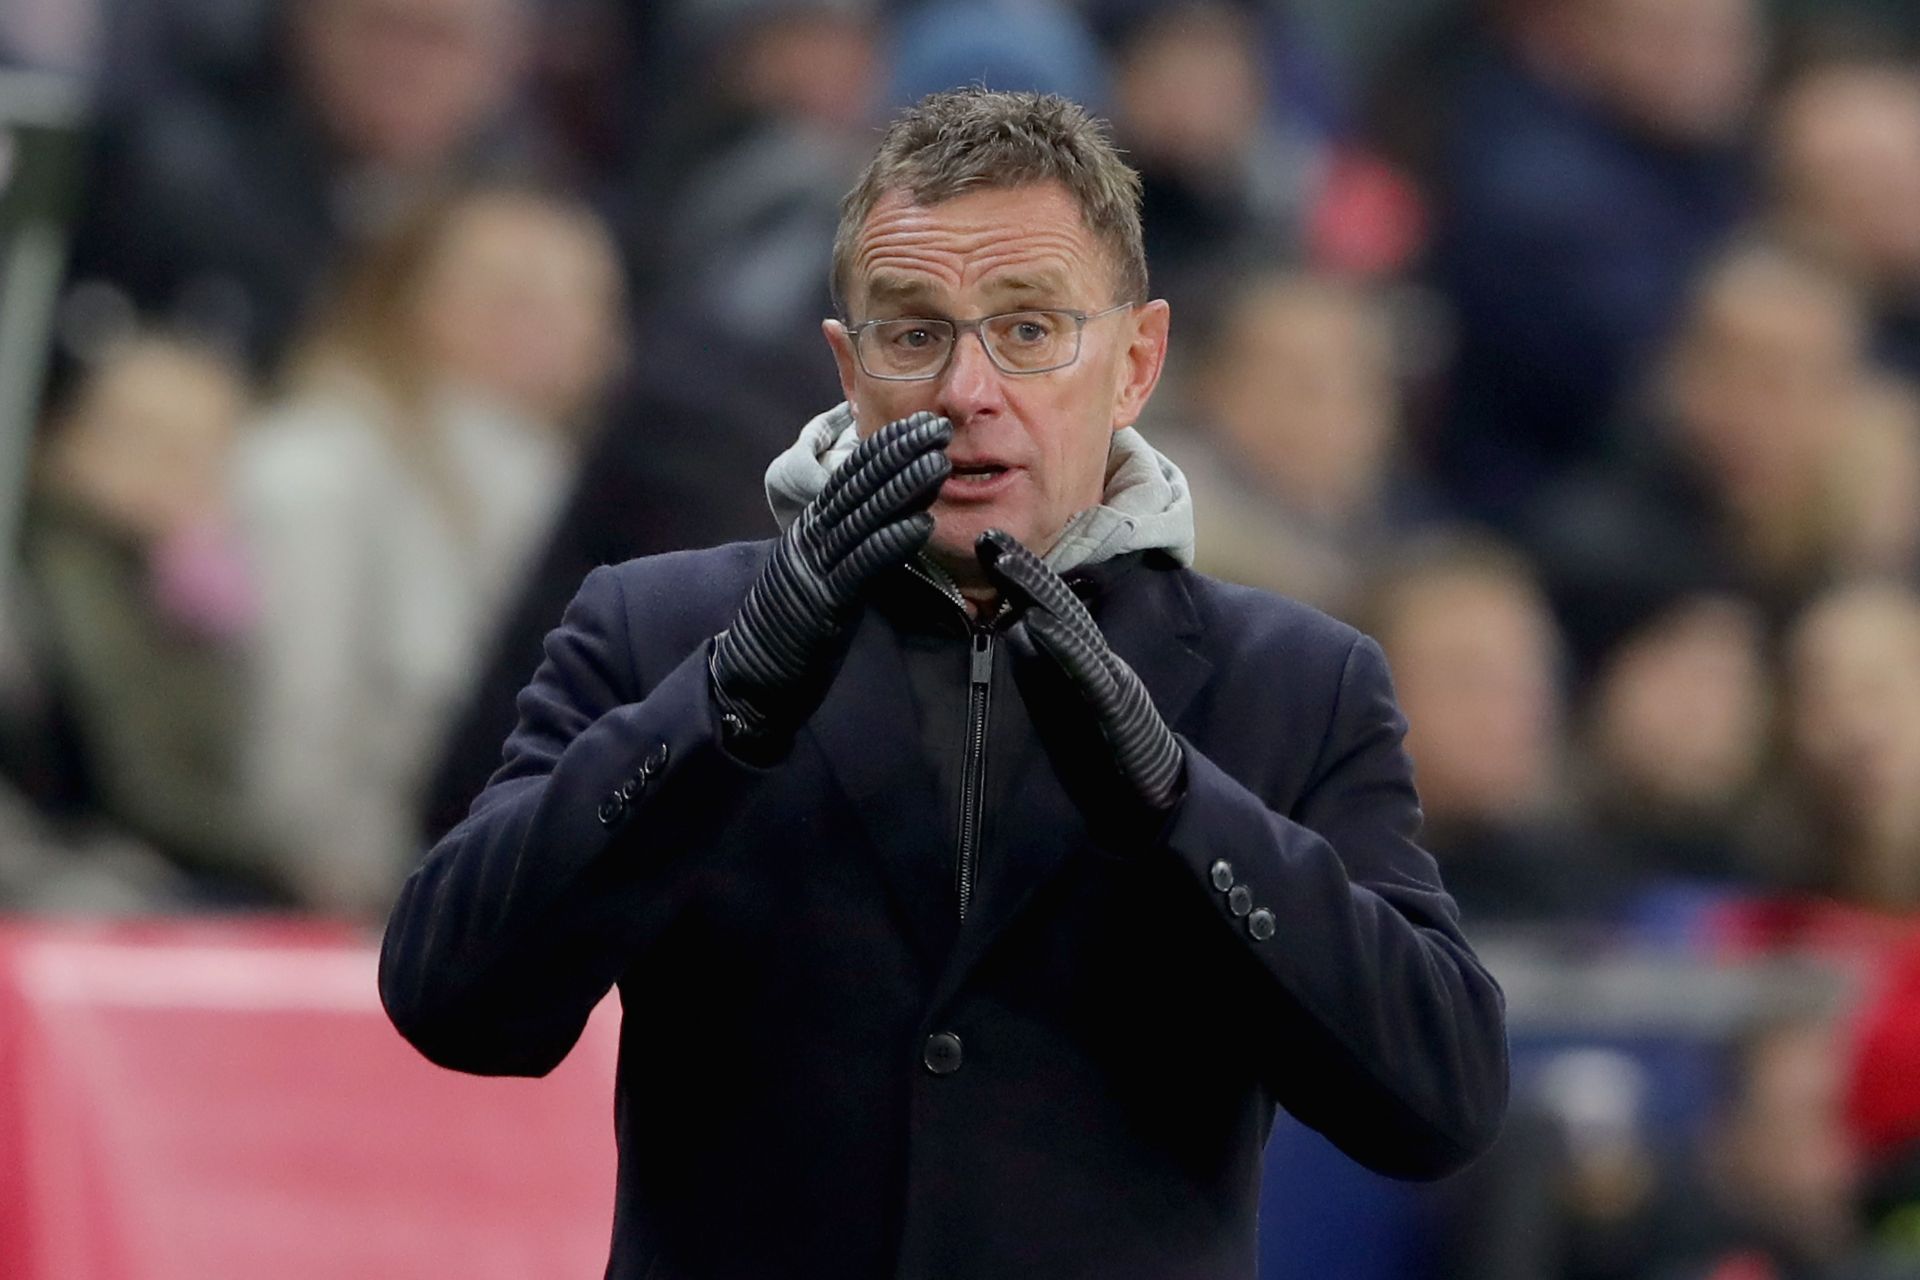 Ralf Rangnick might lose two of his strikers at Manchester United in January.